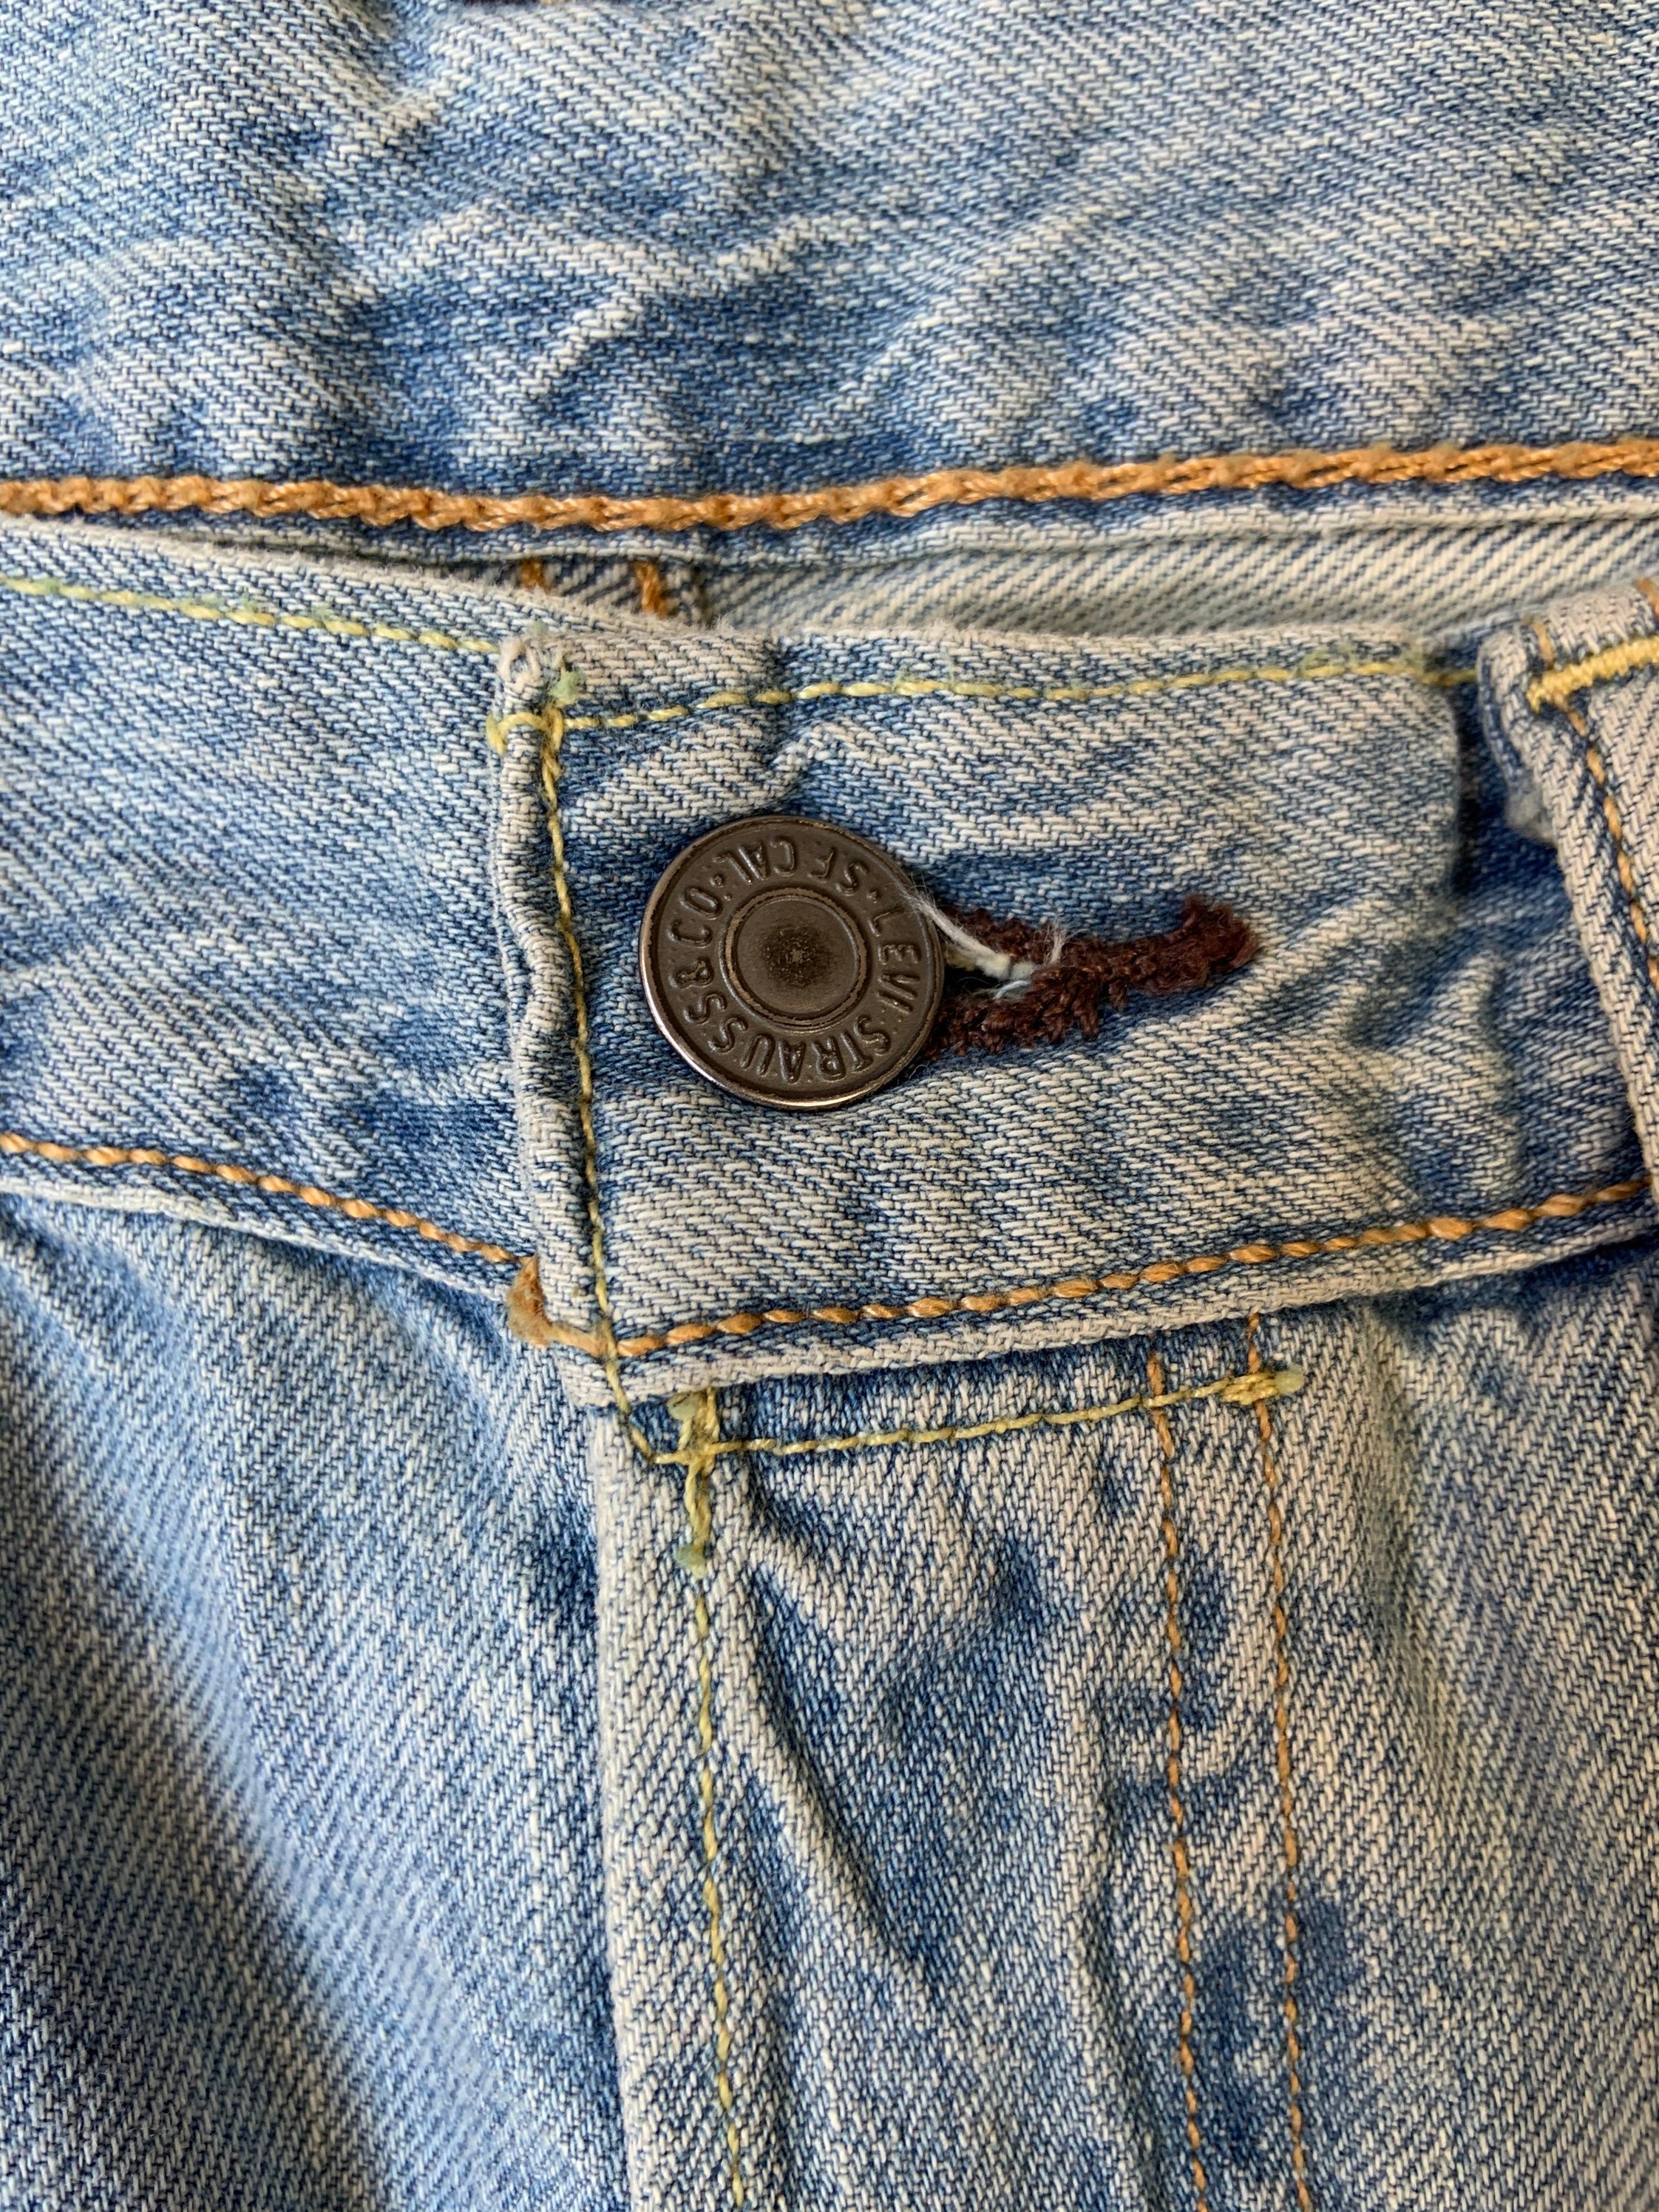 1990s Levis 501 Washed Jeans - Etsy